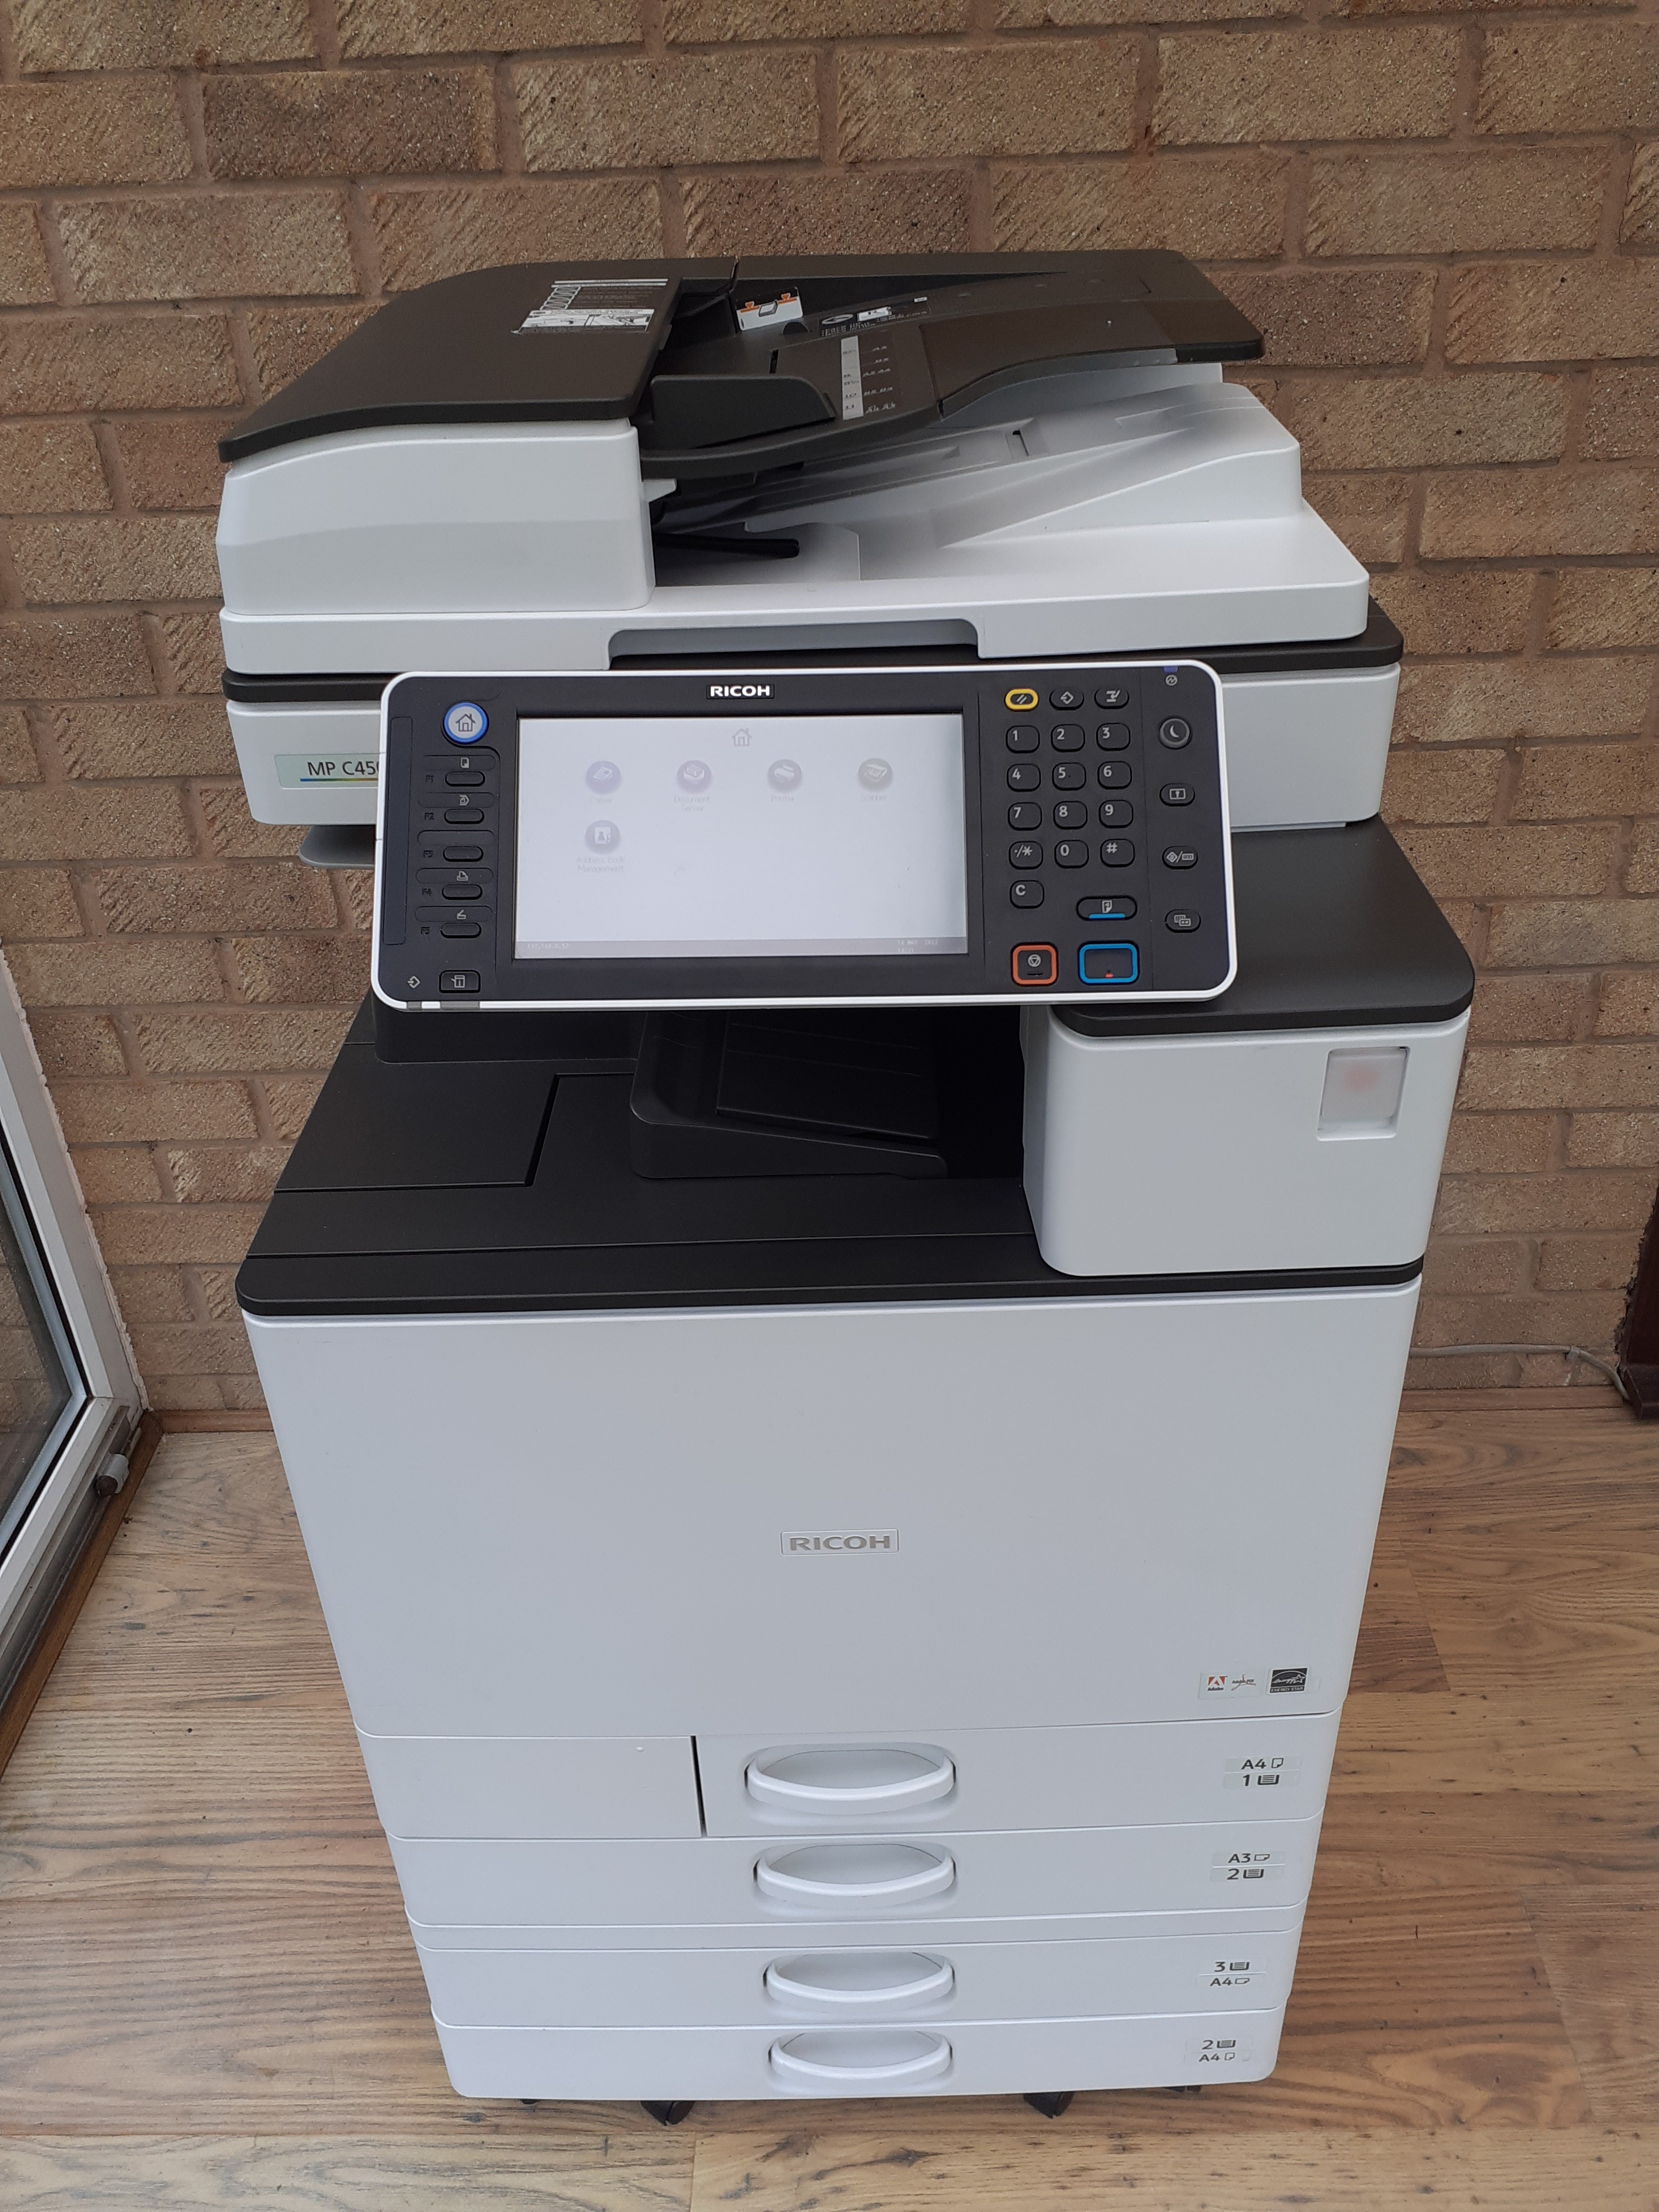 FREE 3 months warranty Ricoh MPC4000 photocopier fully reconditioned 